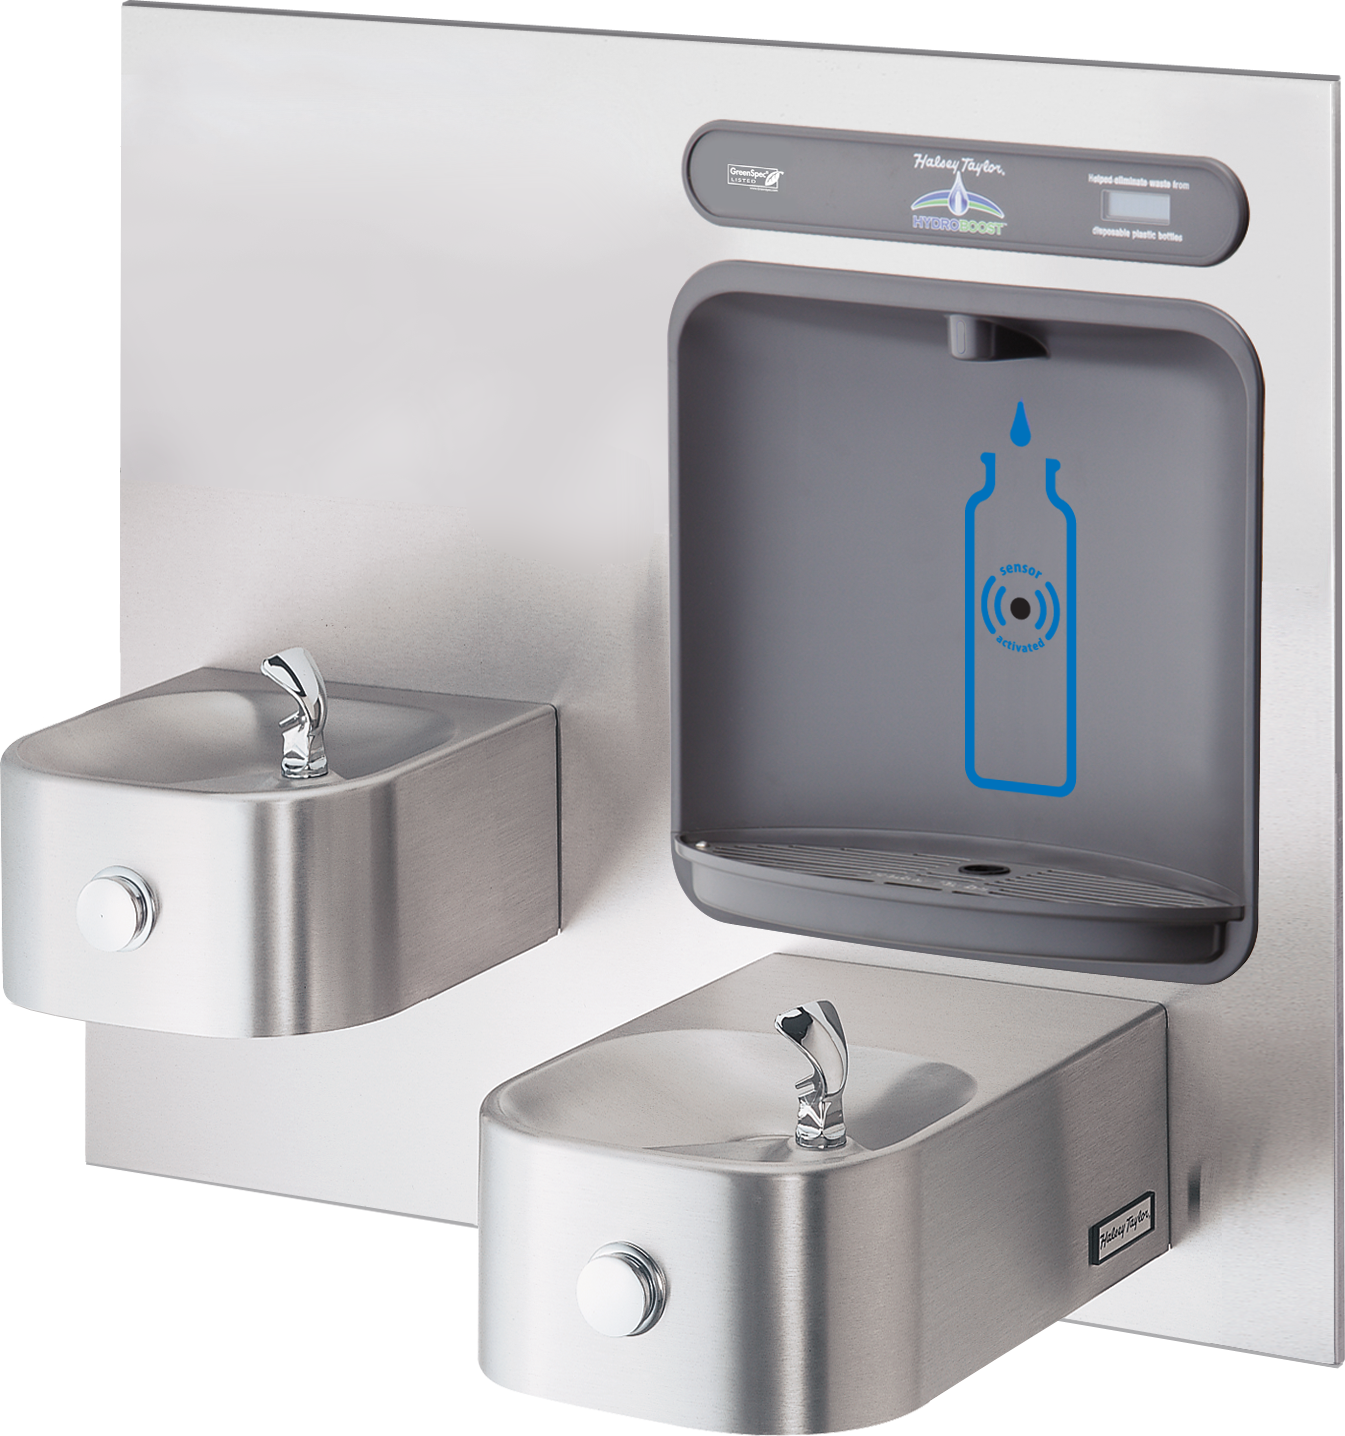 Halsey Taylor HTHB-HRFSEBP-I | In-wall Bi-level Bottle Filling Station | Filterless, Non-Refrigerated, Contour fountains